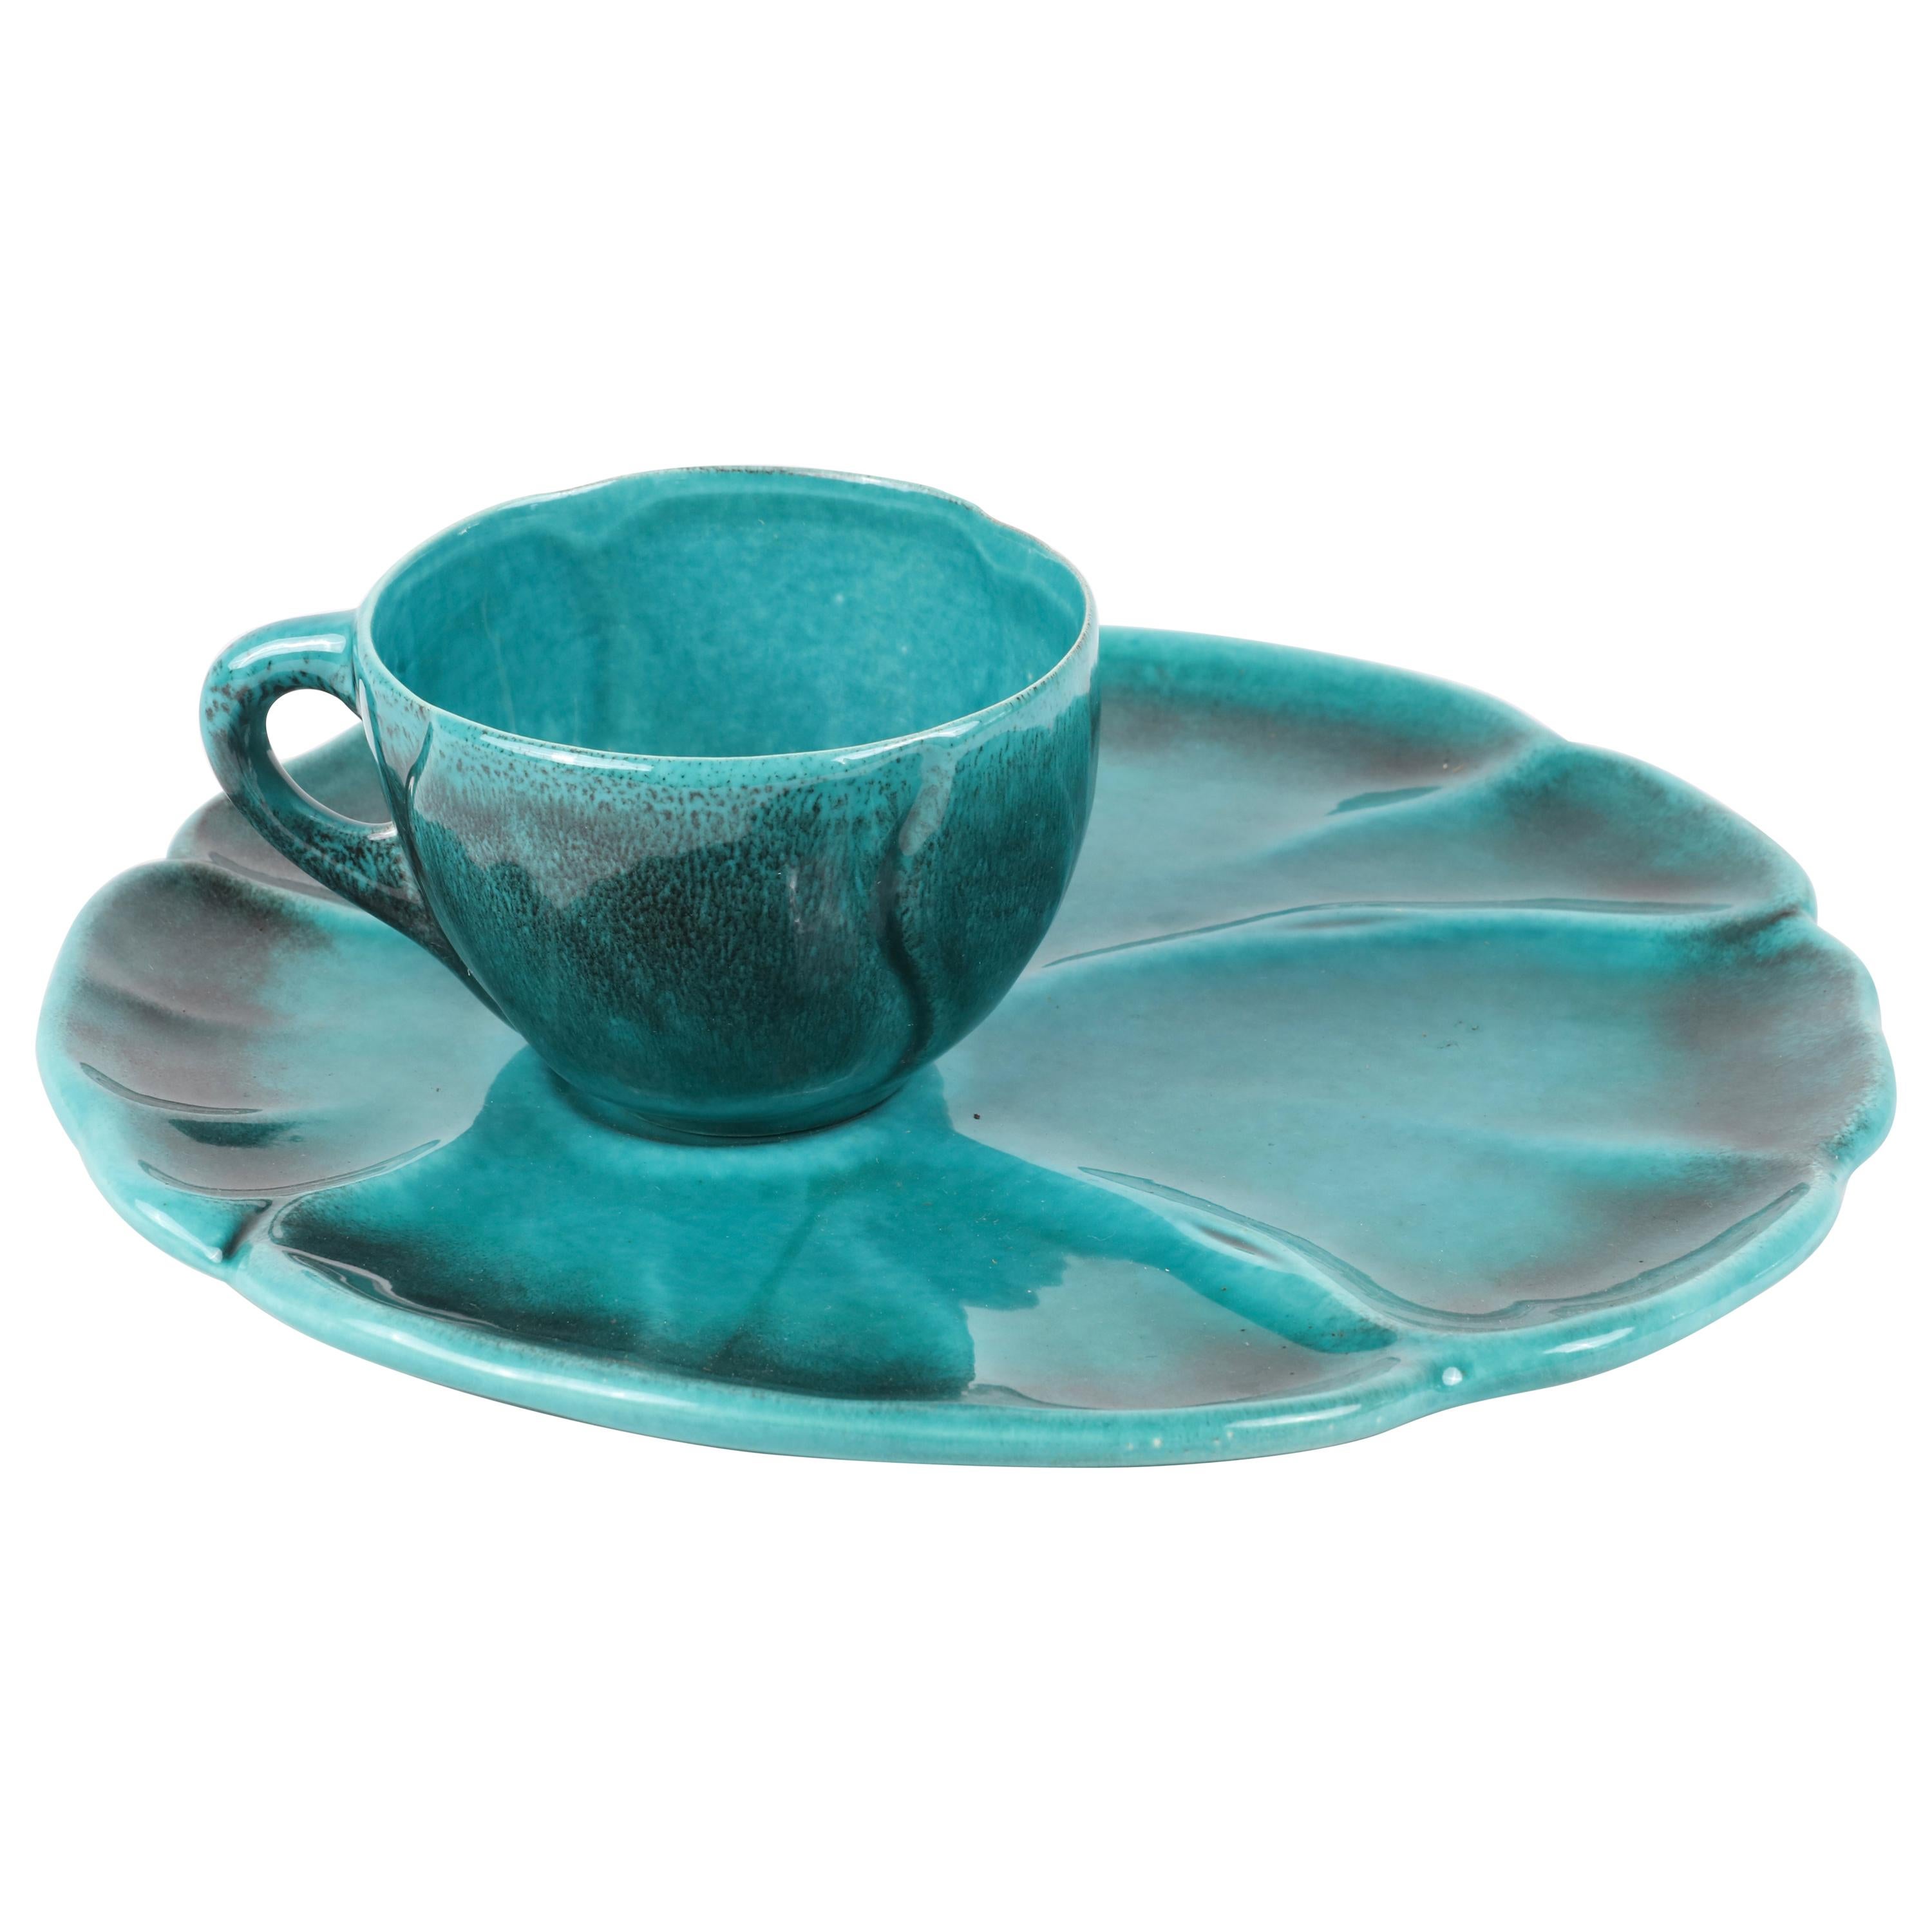 Turquoise Ceramic Luncheon Set for 12